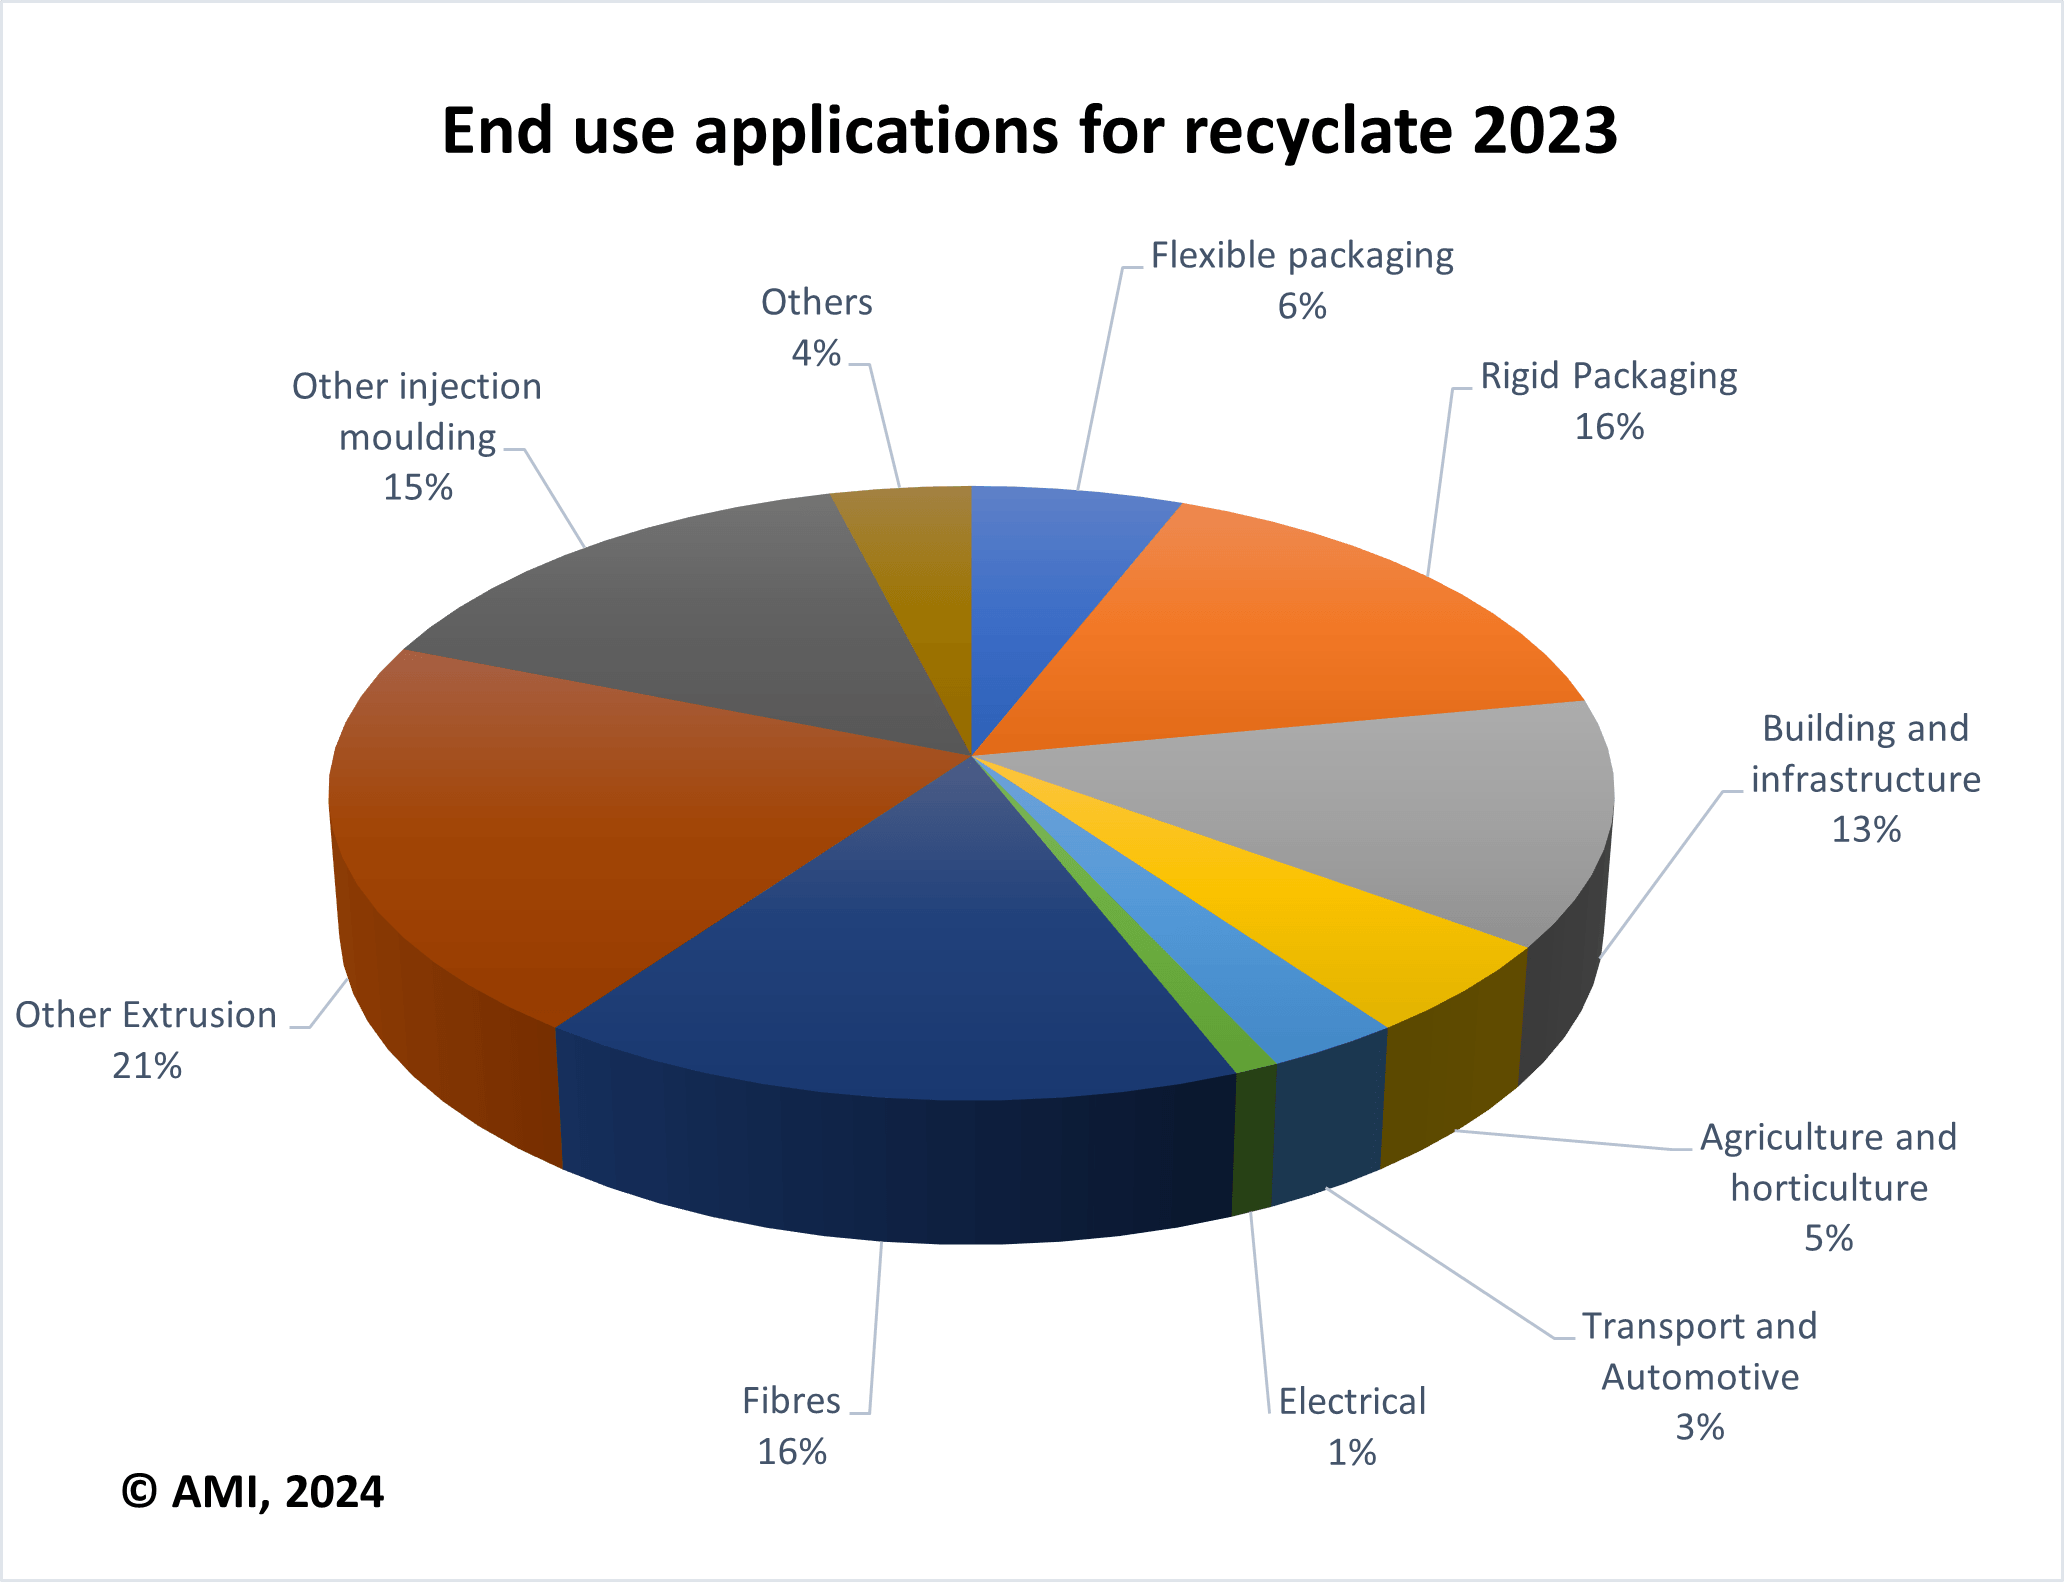 End use applications for recyclate, 2023